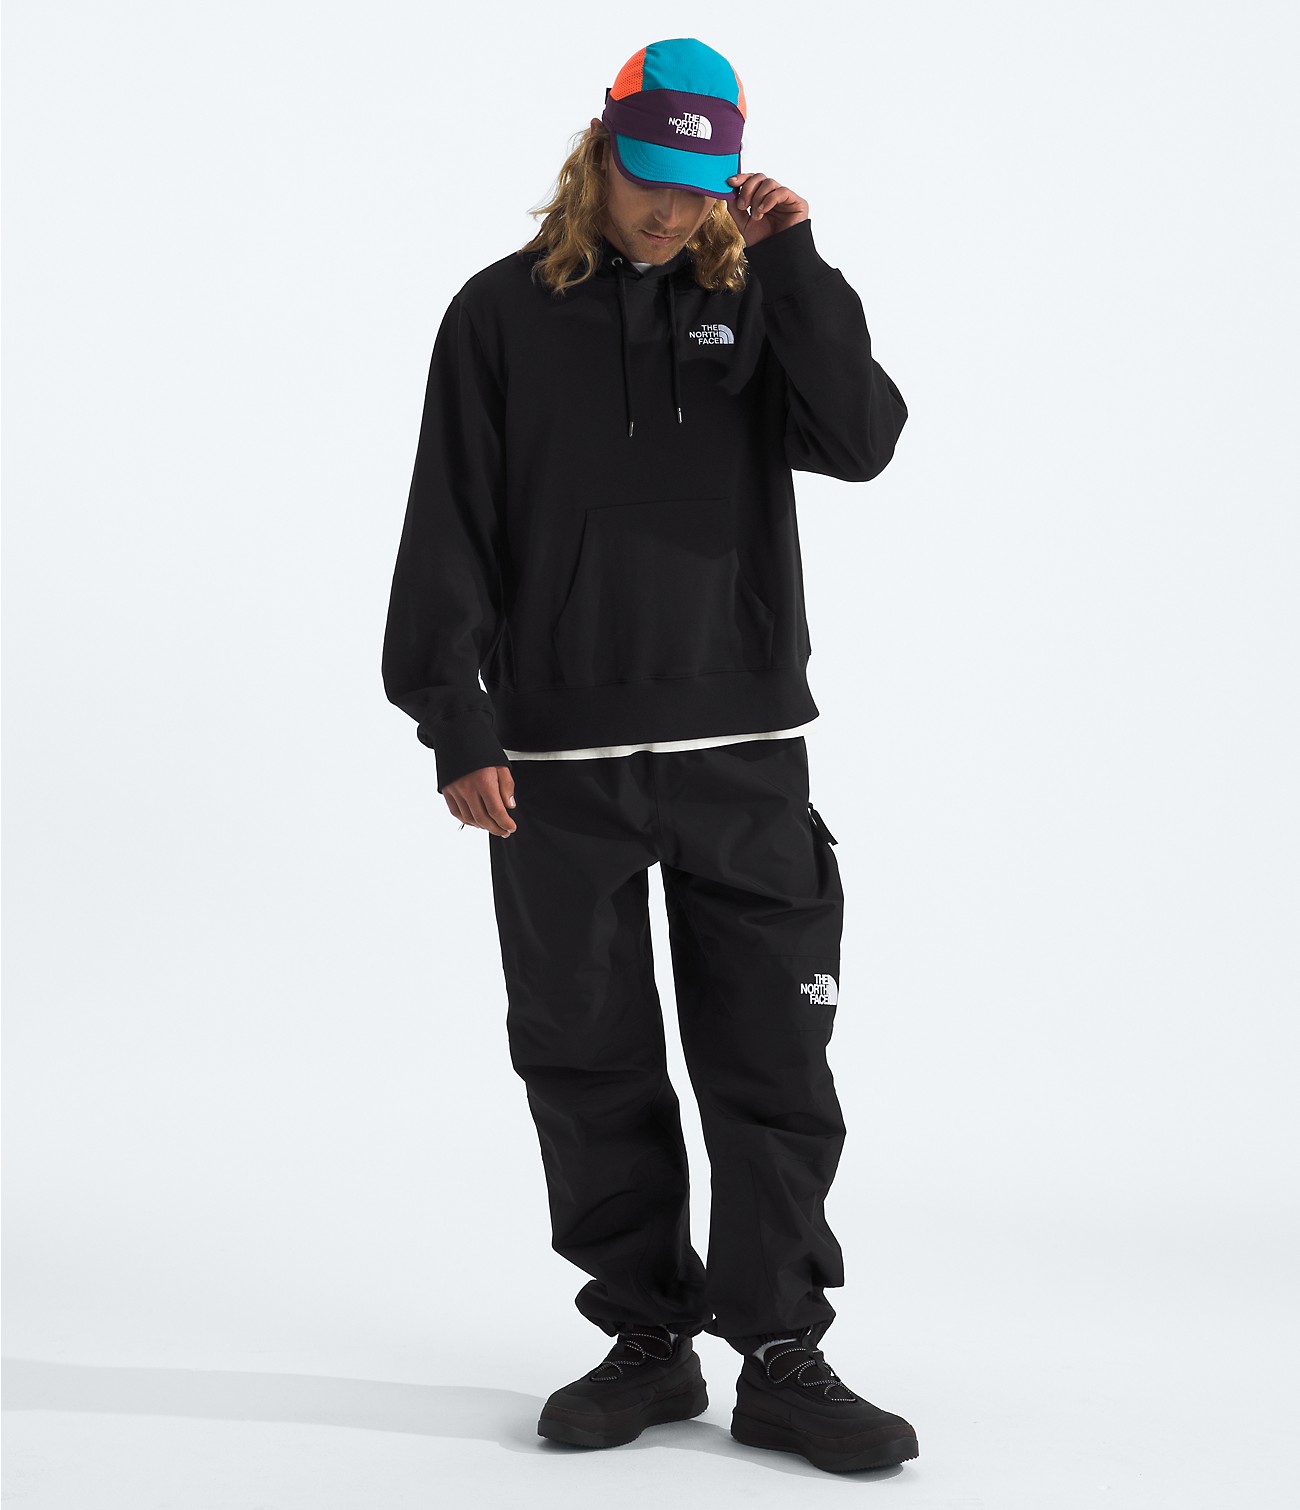 Men’s GORE-TEX® Mountain Pants | The North Face